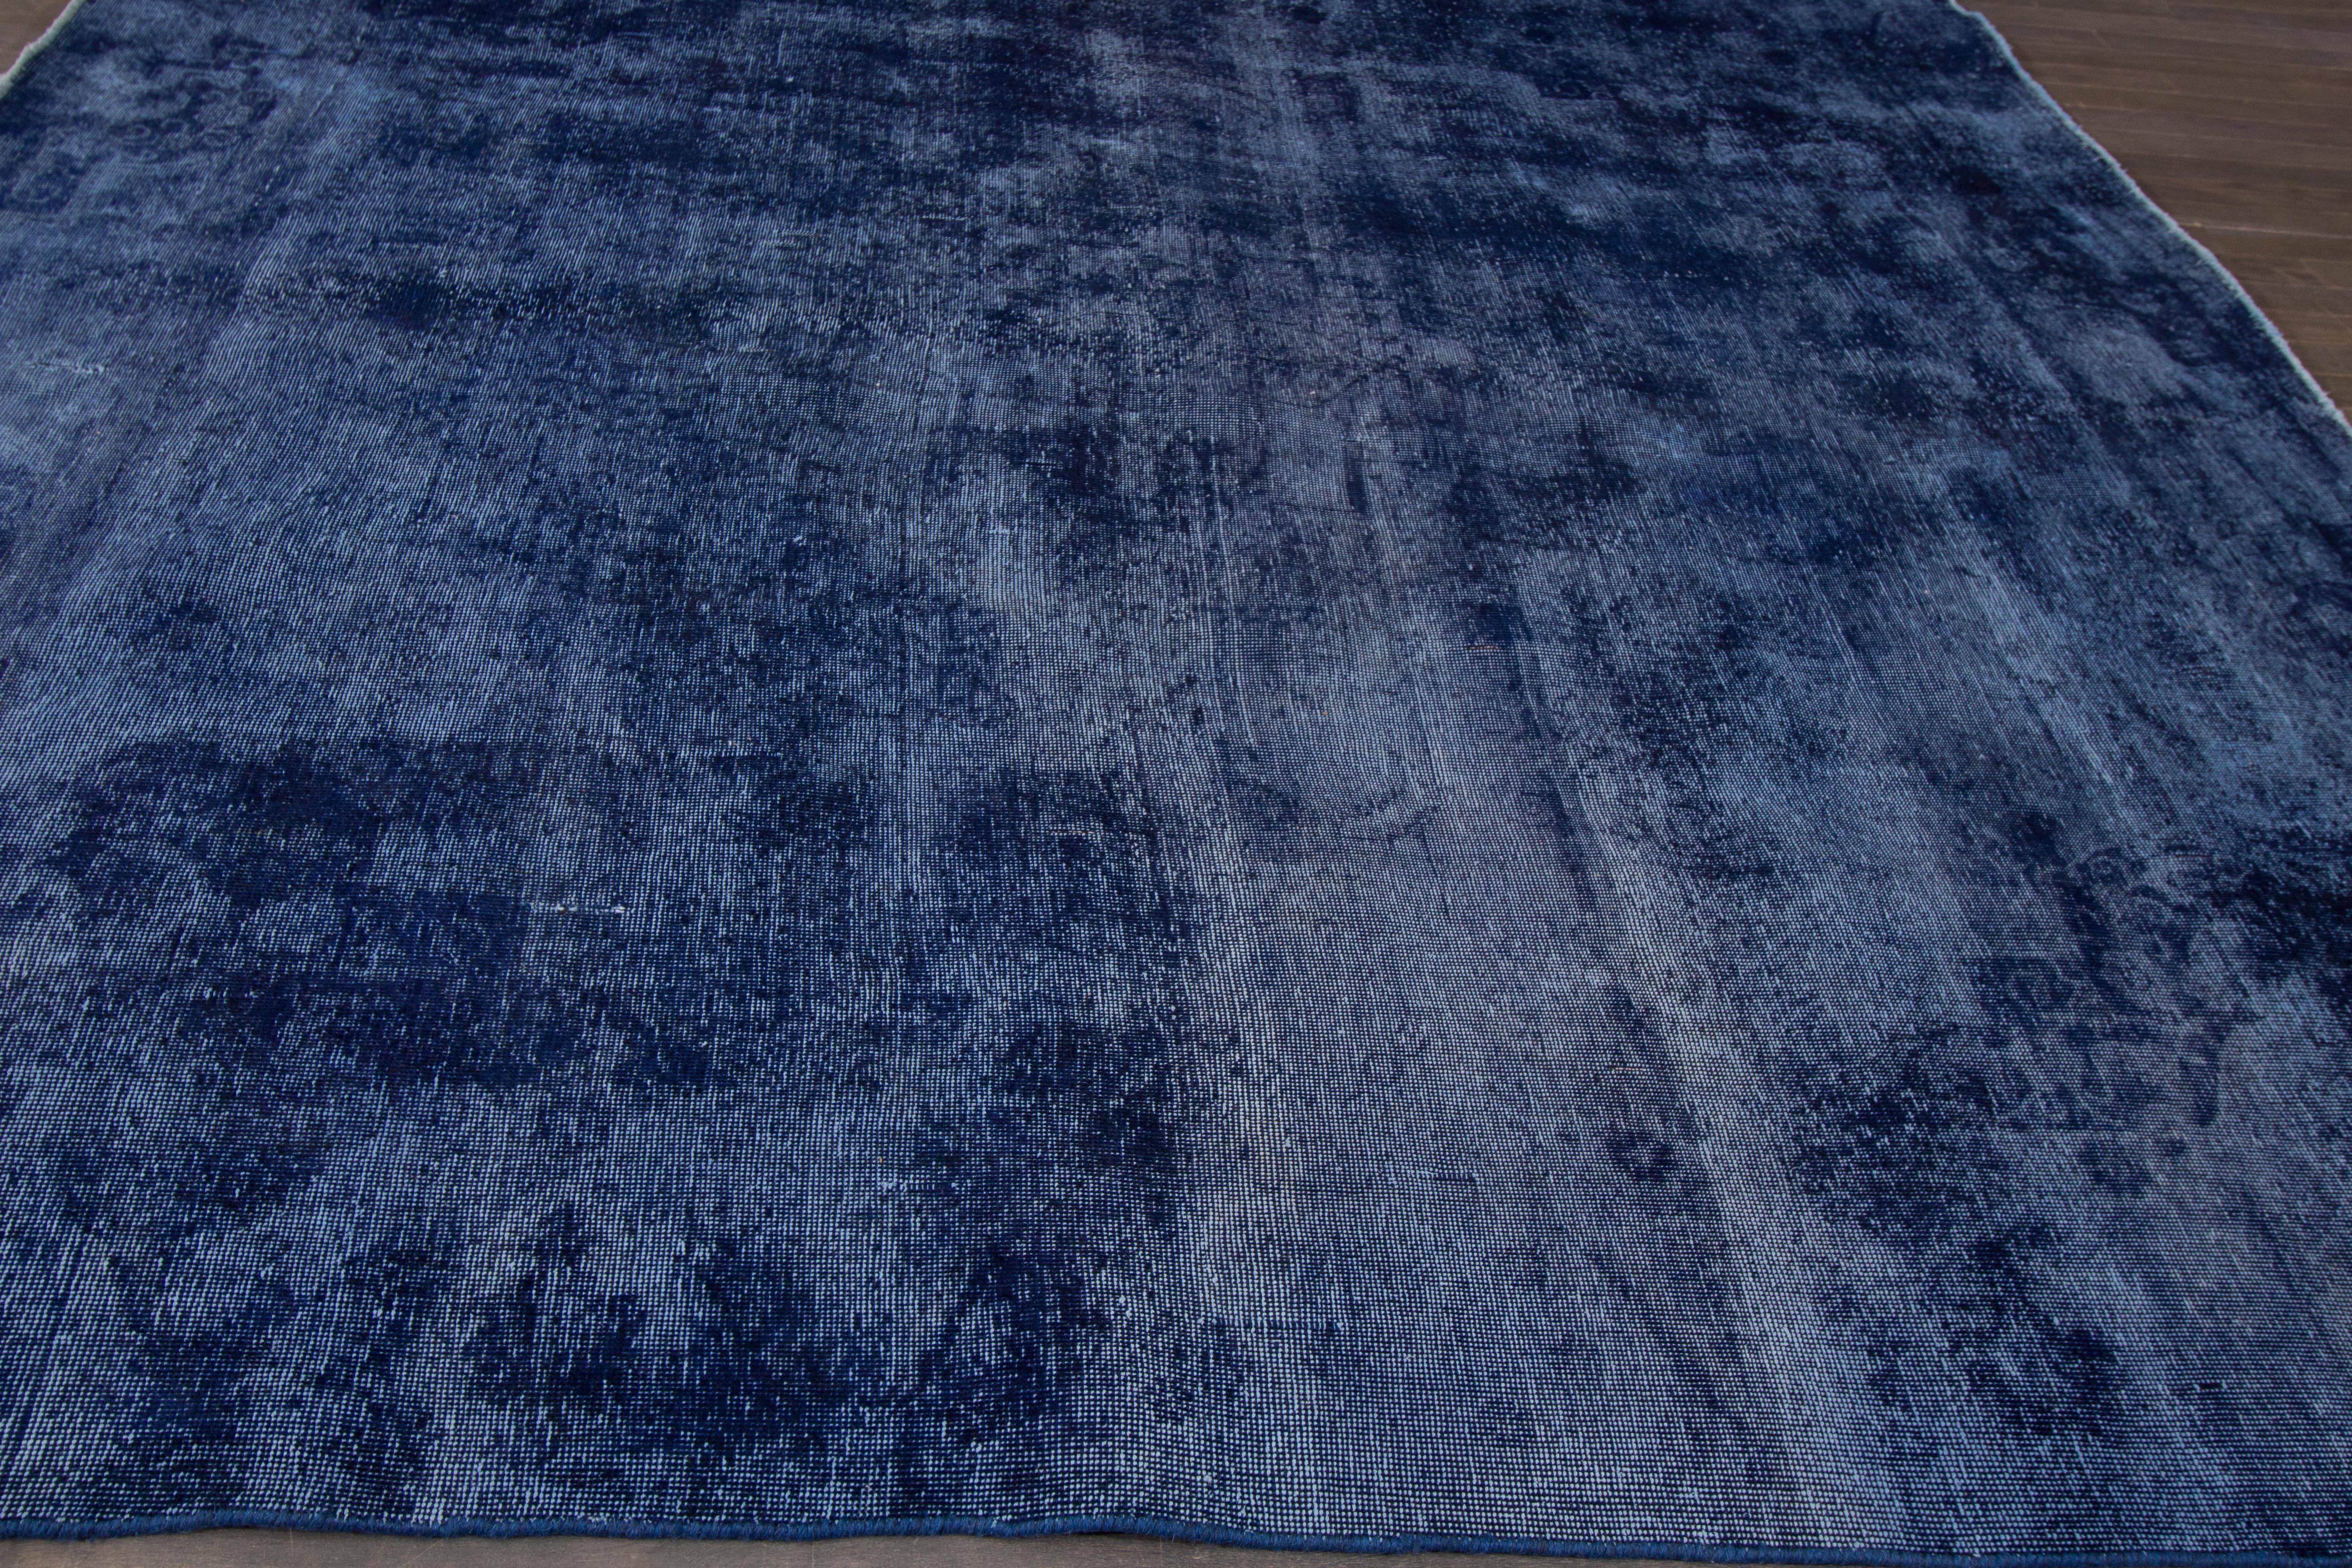 A hand-knotted square Overdyed rug with an all-over design on a blue field. Accents of different shades of blue throughout the piece. This rug measures 9'.5 x 9'.5.